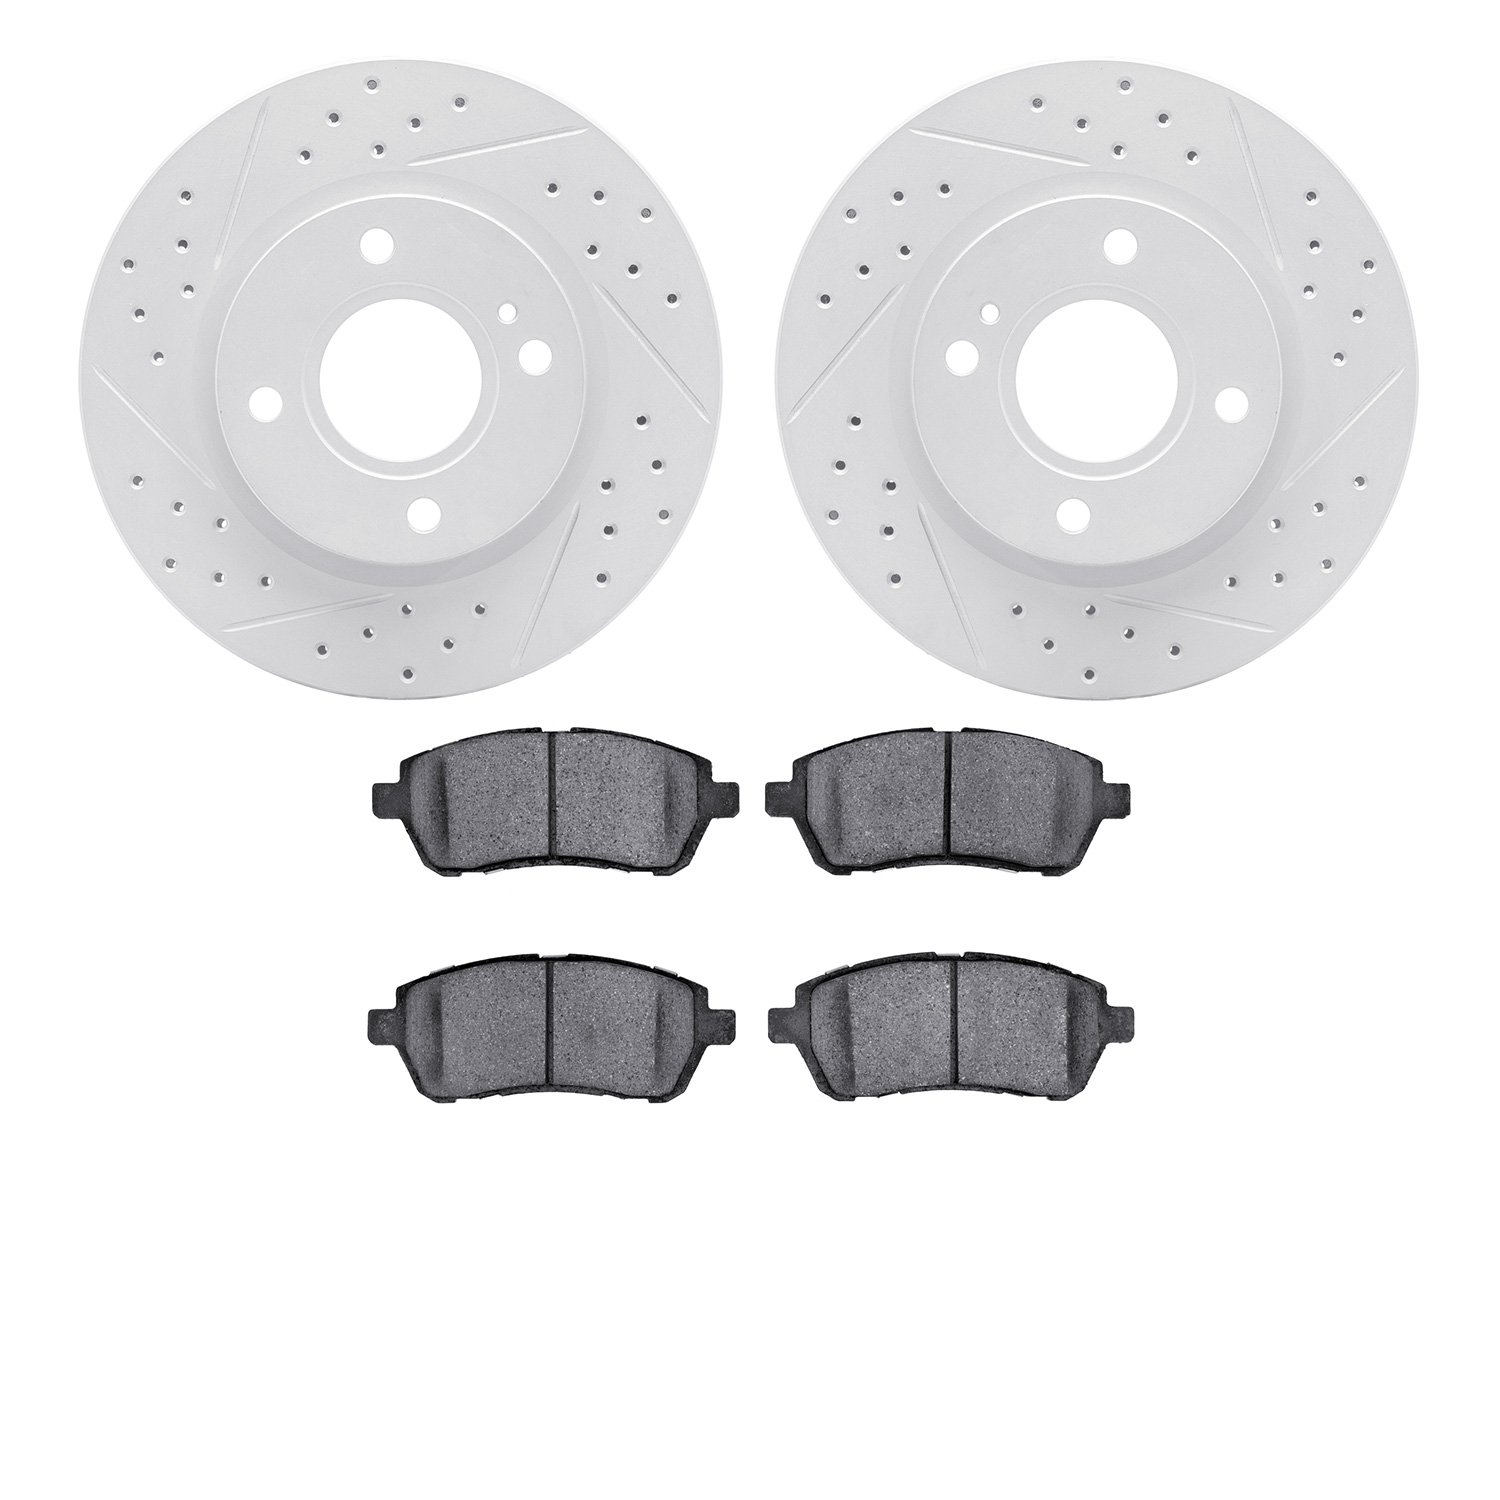 2502-54057 Geoperformance Drilled/Slotted Rotors w/5000 Advanced Brake Pads Kit, 2011-2019 Ford/Lincoln/Mercury/Mazda, Position: